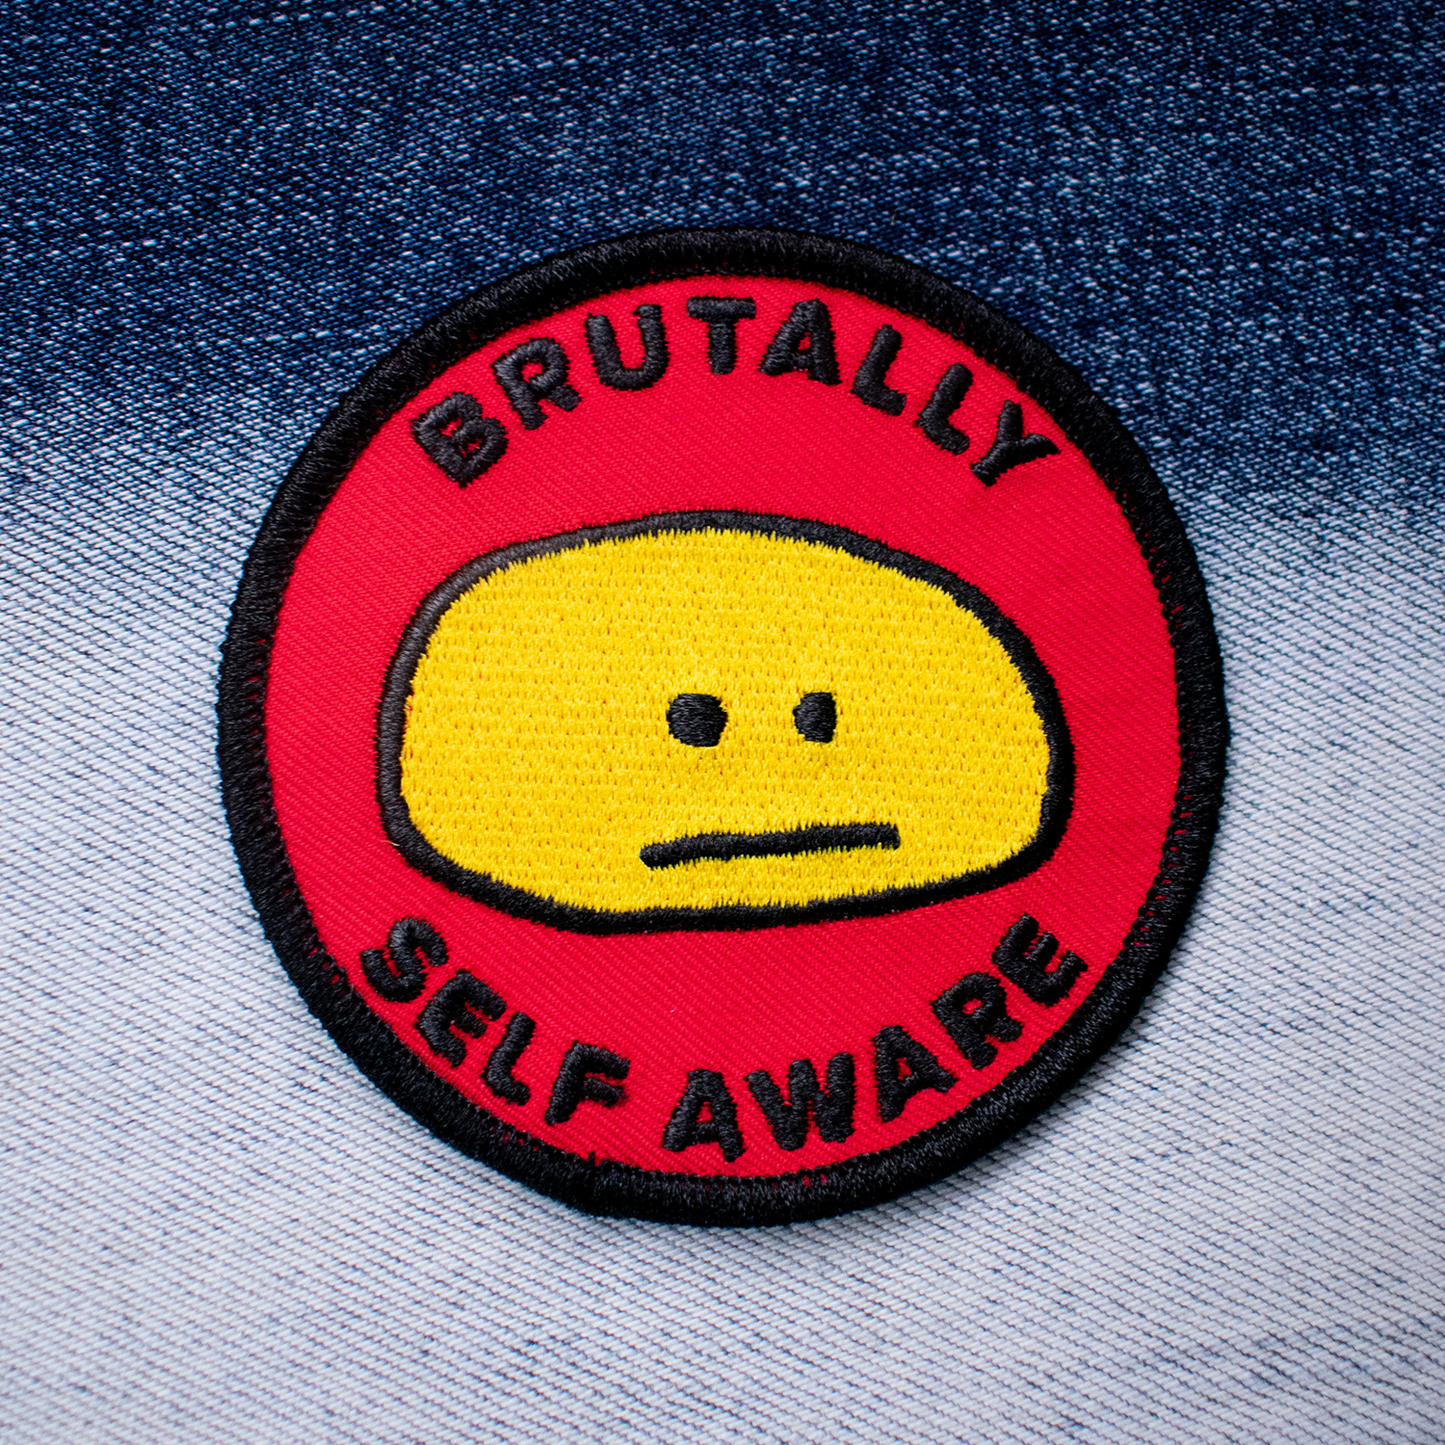 Brutally Self Aware Embroidered Patch